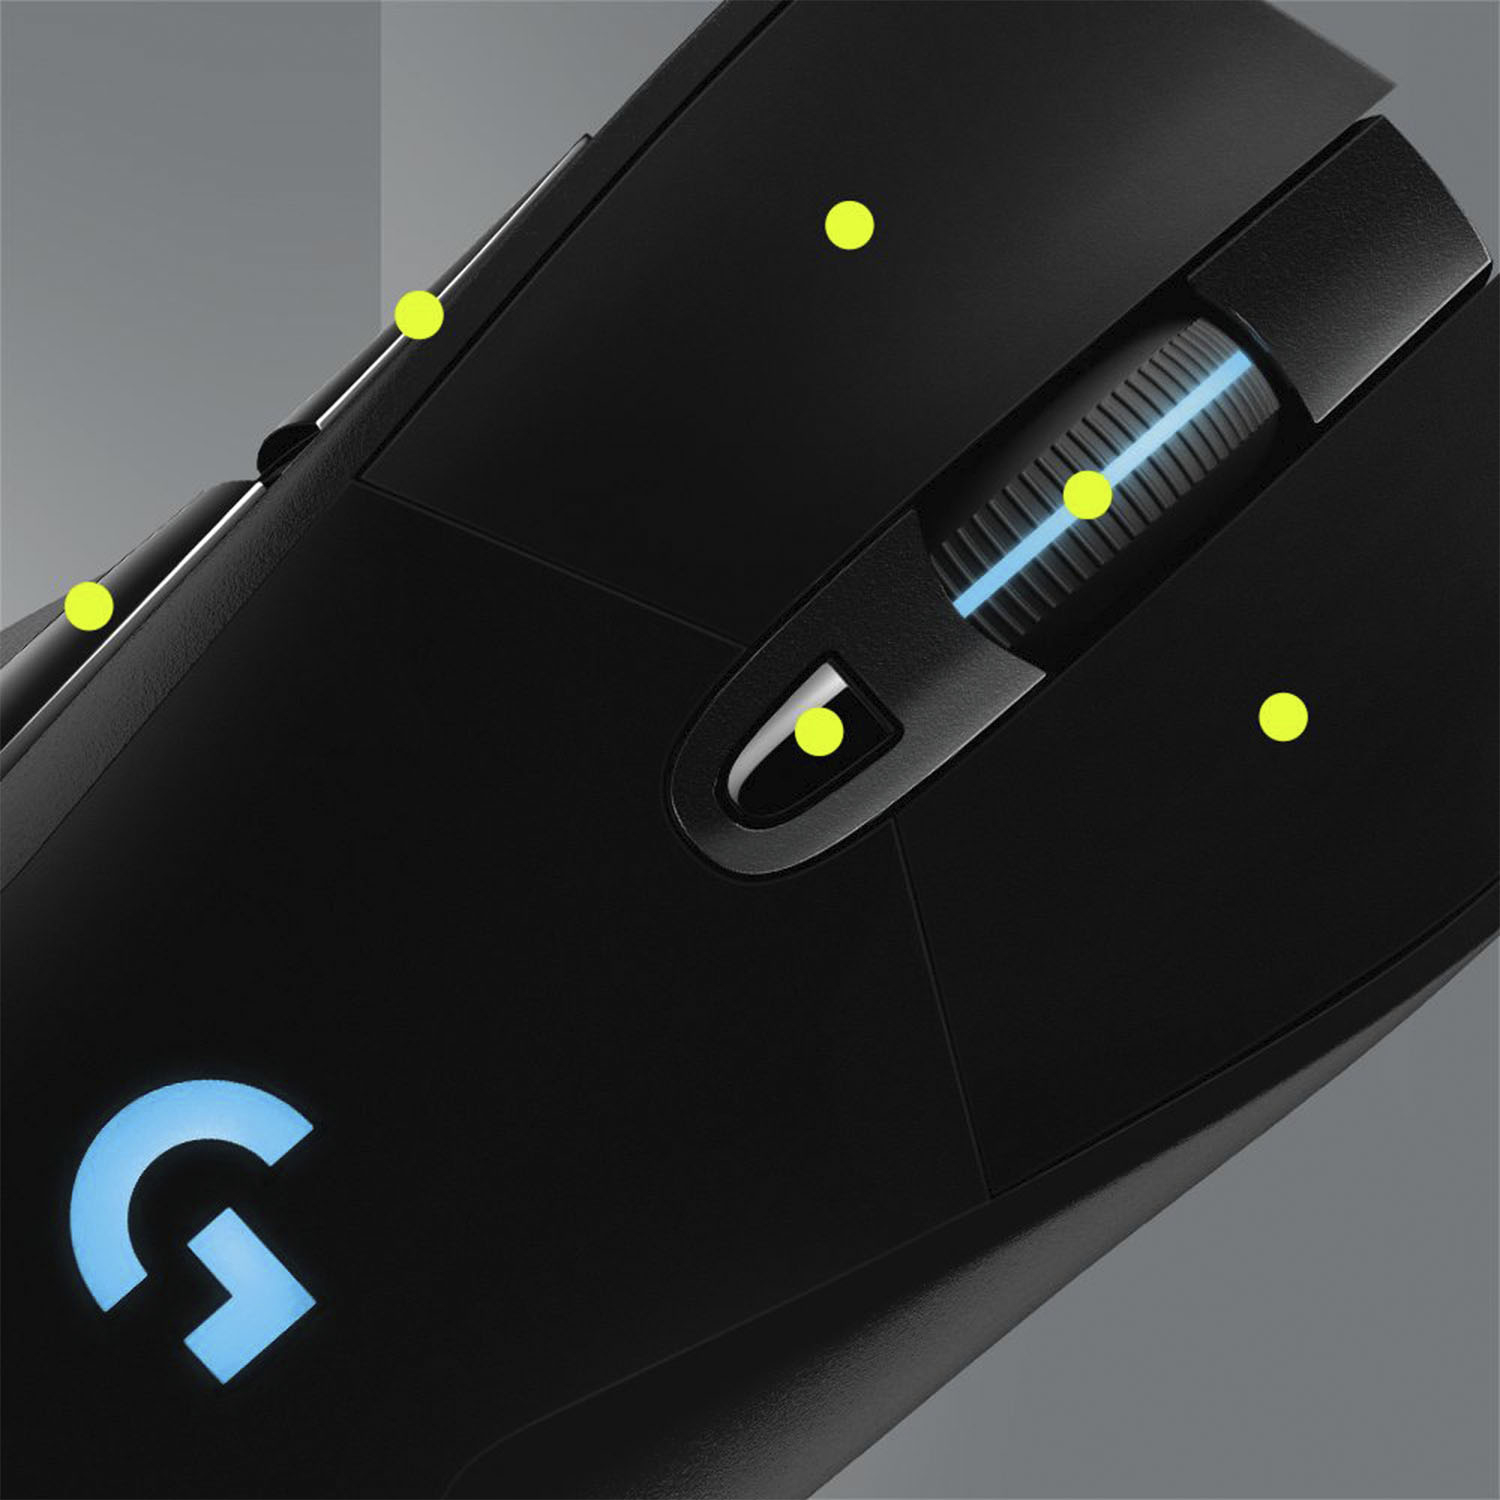 Logitech G703 Lightspeed Pro-Grade Wireless Gaming Mouse, 16,000 DPI, RGB,  Adjustable Weights, 6 Programmable Buttons, On-Board Memory, Long Battery